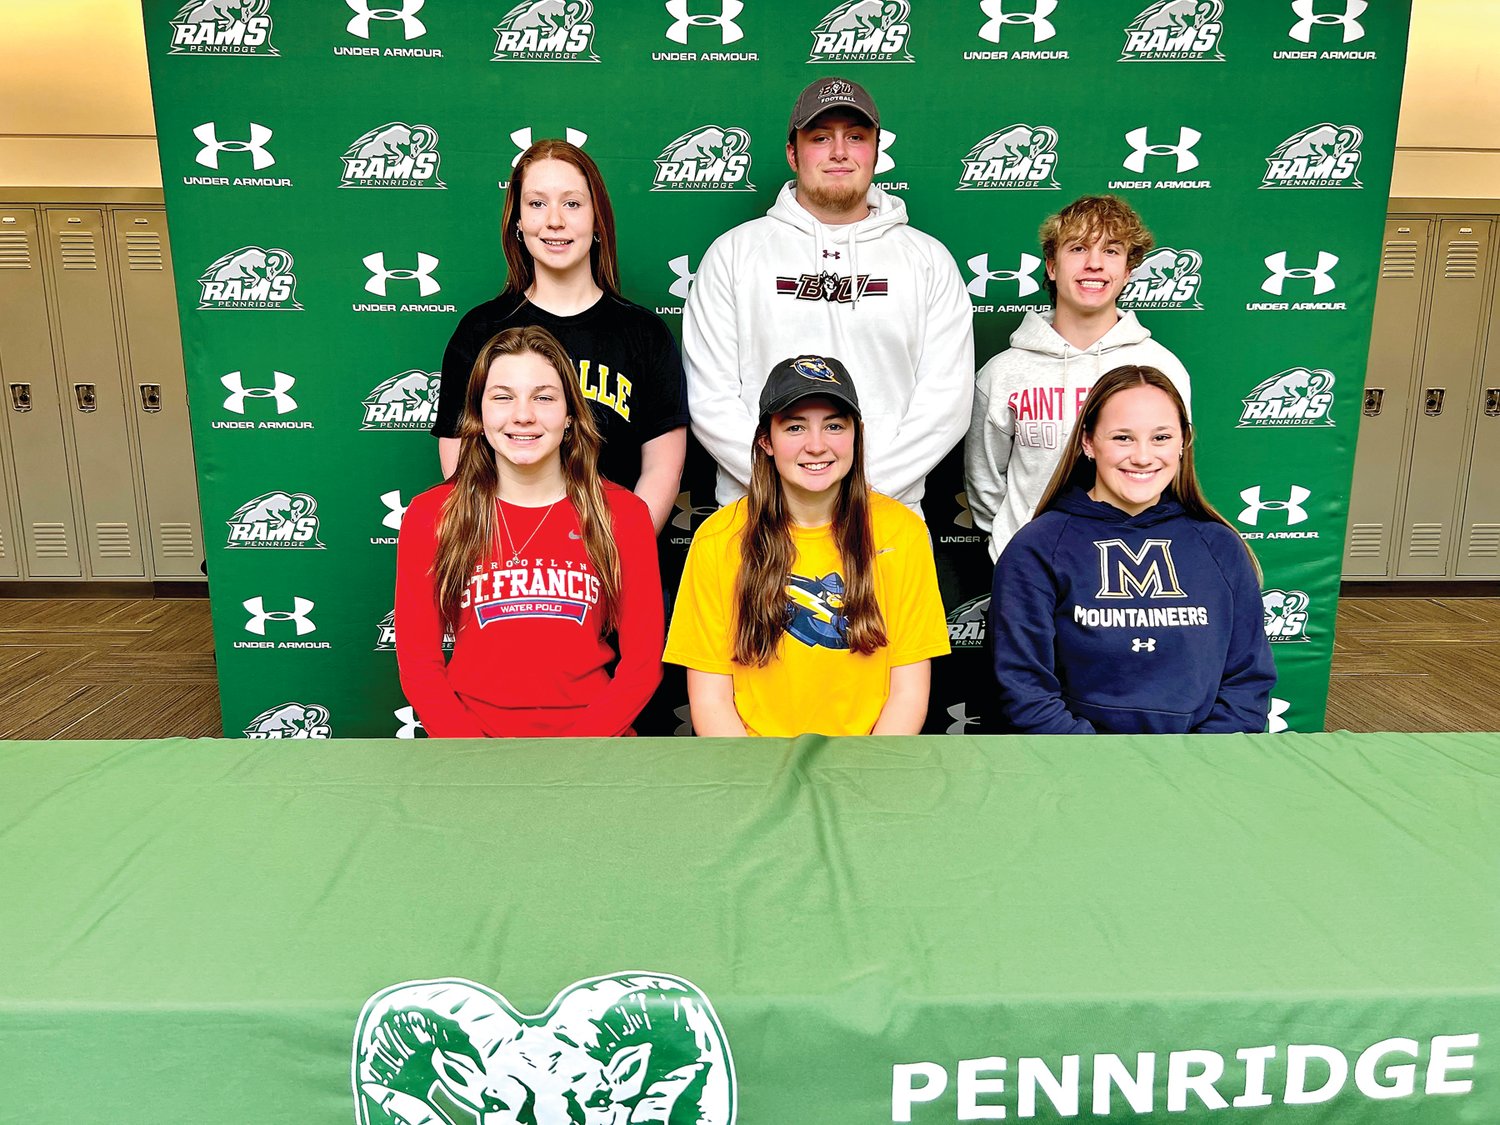 Six Pennridge seniors revealed their college selections on Feb. 28. From left are: front row, Emily Myers, Katie Yoder, Raegan Vesey; back row, Katelyn Cuthbert, Loughlin Smith and Dominic Galante.